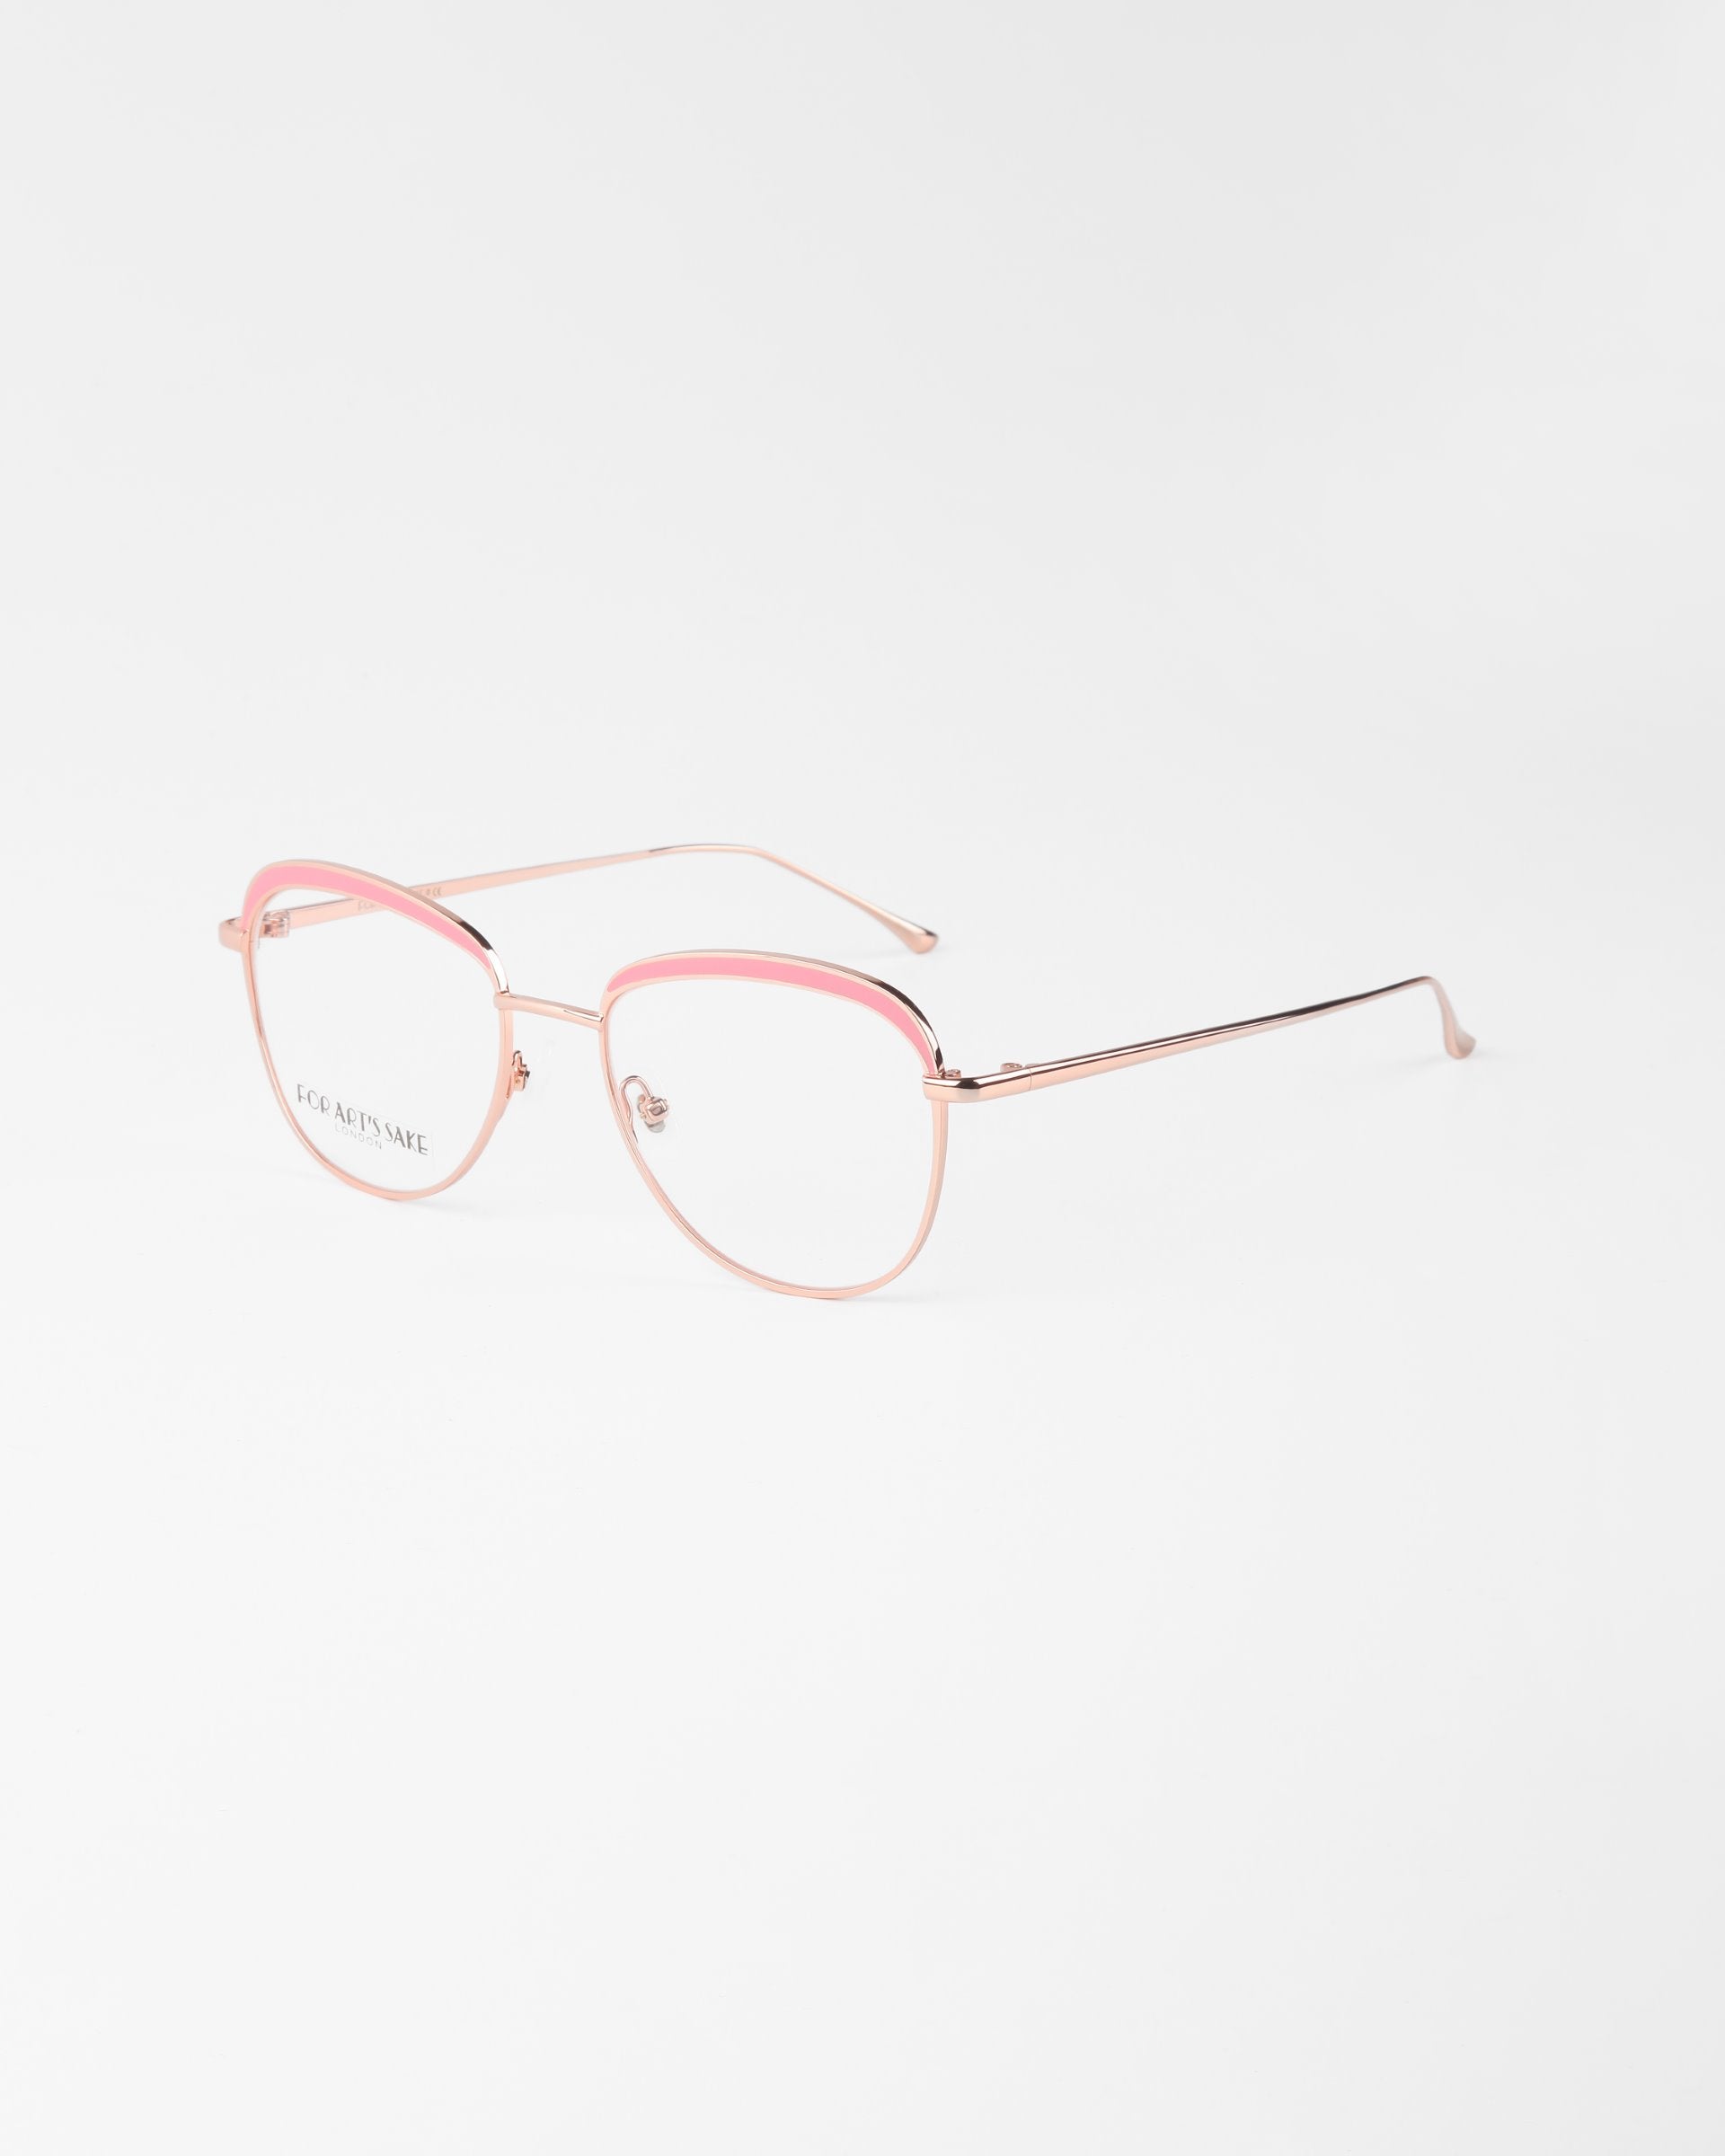 A pair of eyeglasses with delicate pink metal frames. The Smoothie by For Art&#39;s Sake® features rounded lenses with blue light filter technology and a thin bridge, with the temples extending gracefully from the hinges. The overall design is sleek and minimalist, set against a plain white background.